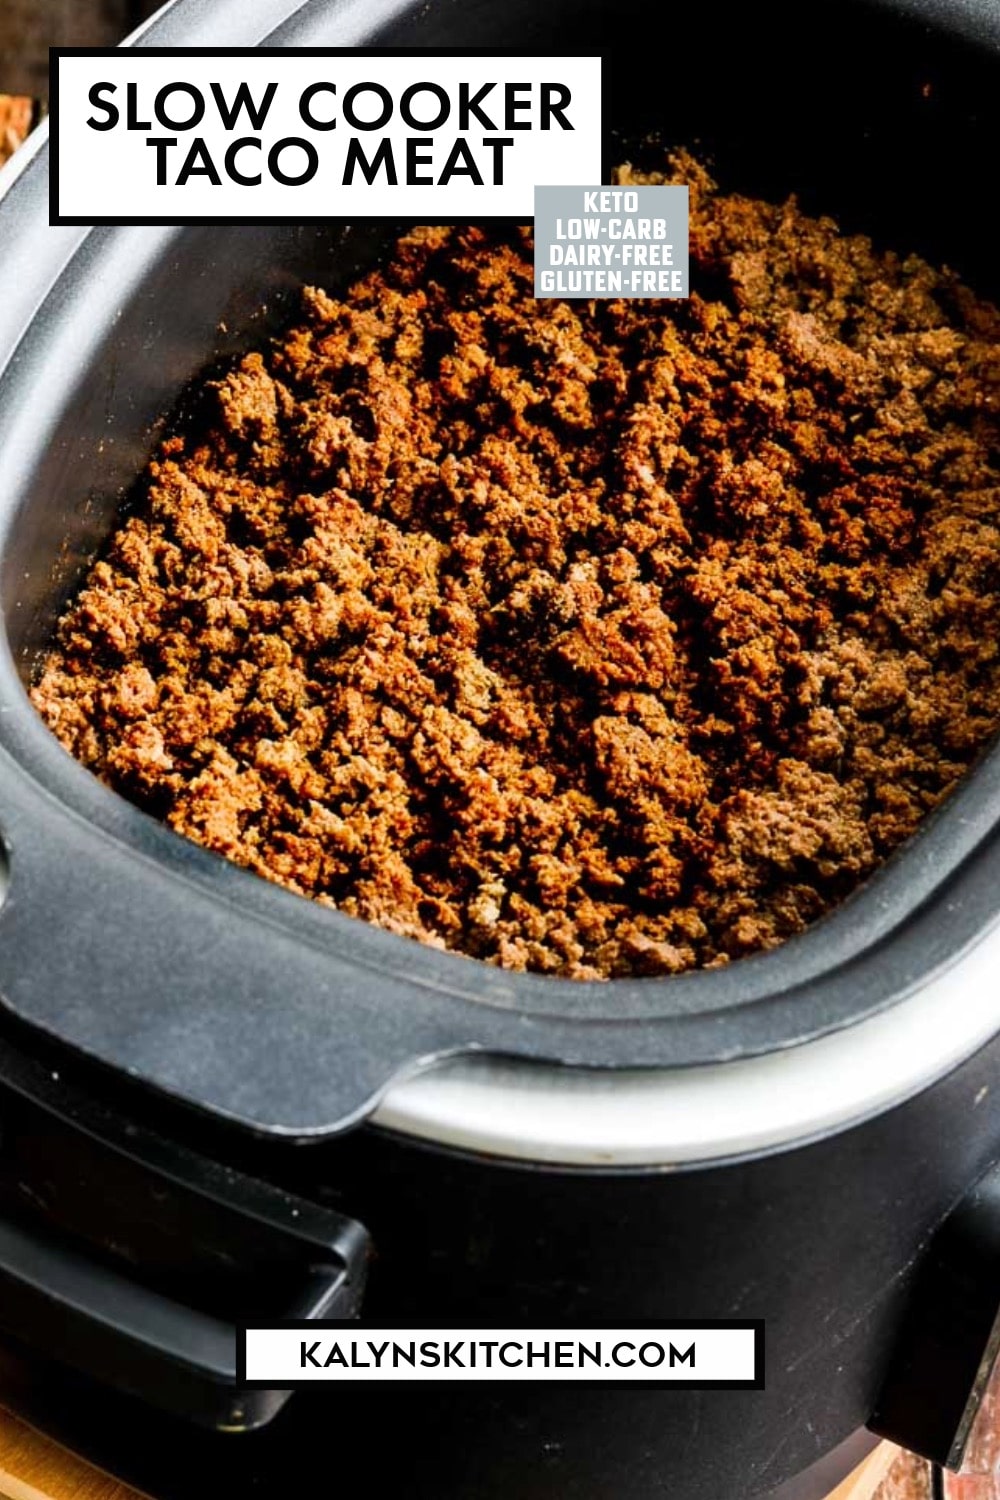 Pinterest image of Slow Cooker Taco Meat